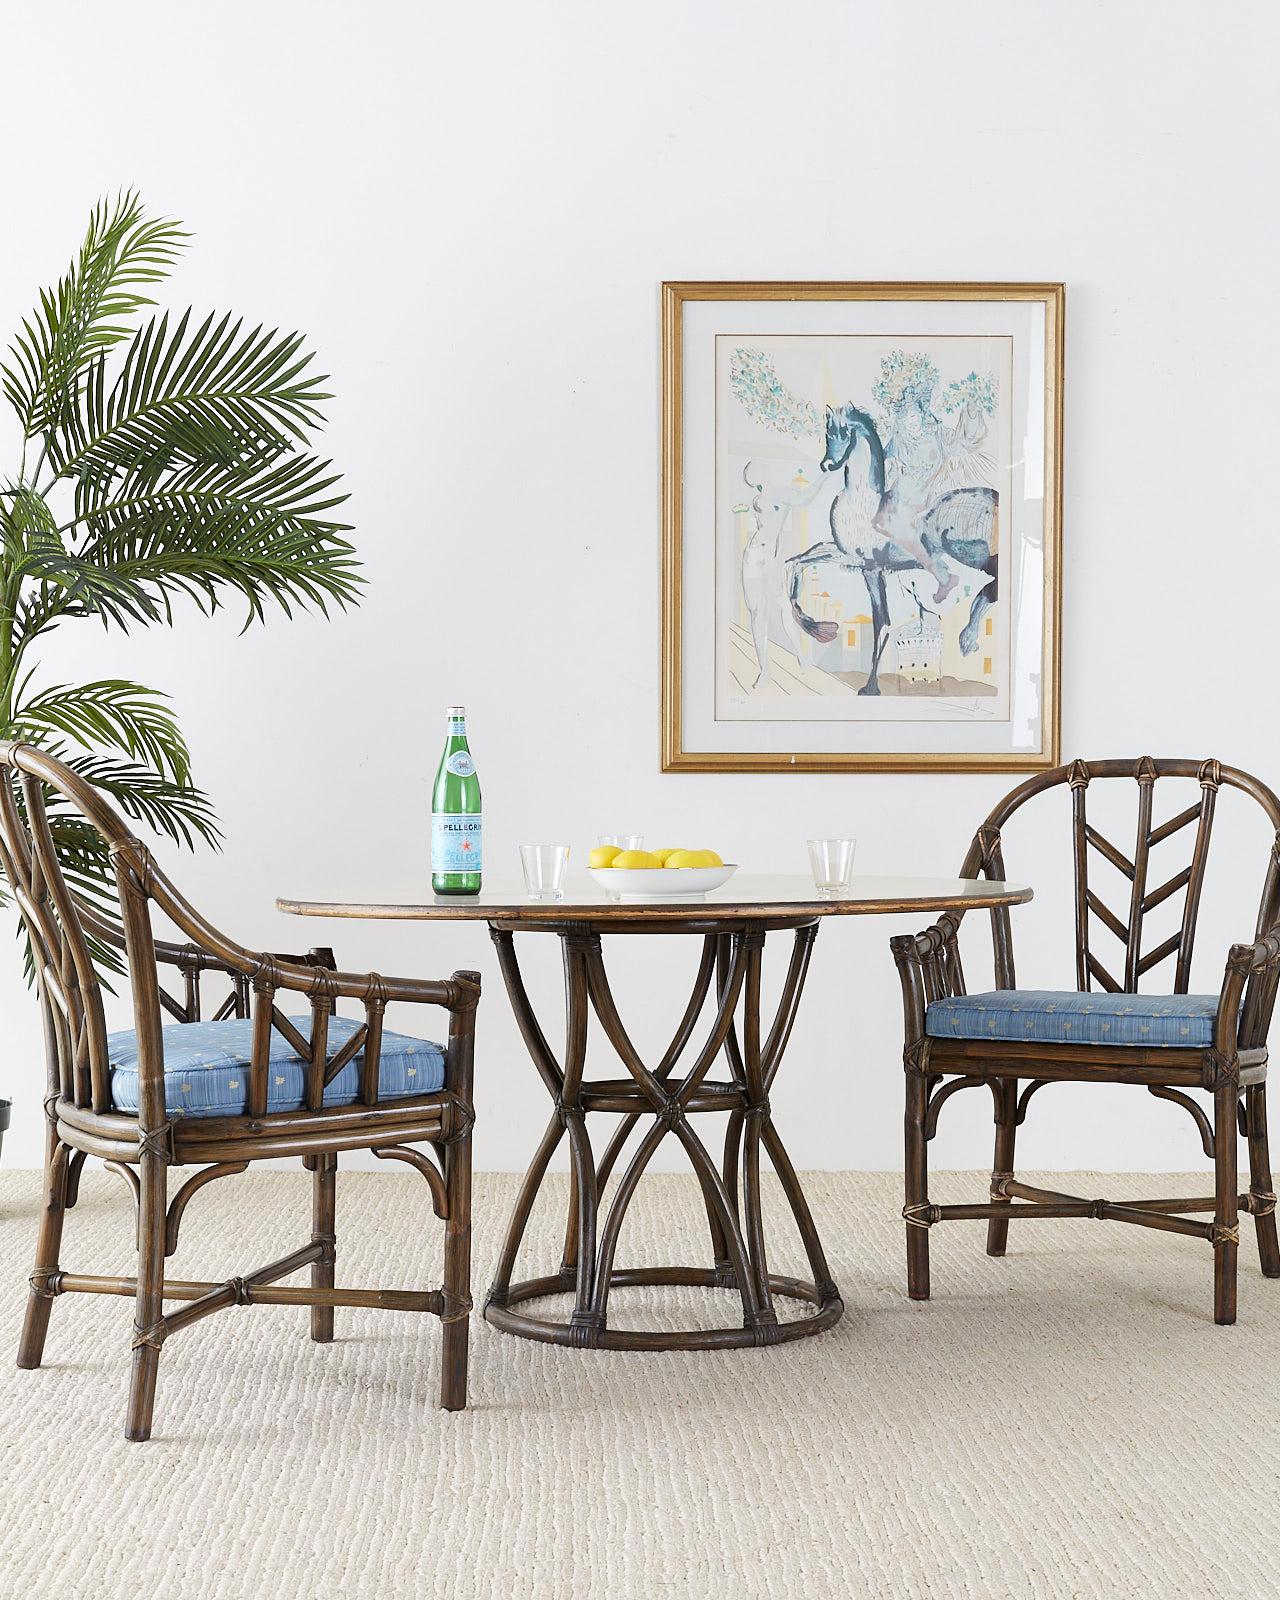 Distinctive set of four organic modern bamboo rattan dining chairs or armchairs made by McGuire. Features a thick rattan frame with a gracefully curved horseshoe style back. Decorated with an open fretwork design on the sides and back. Reinforced